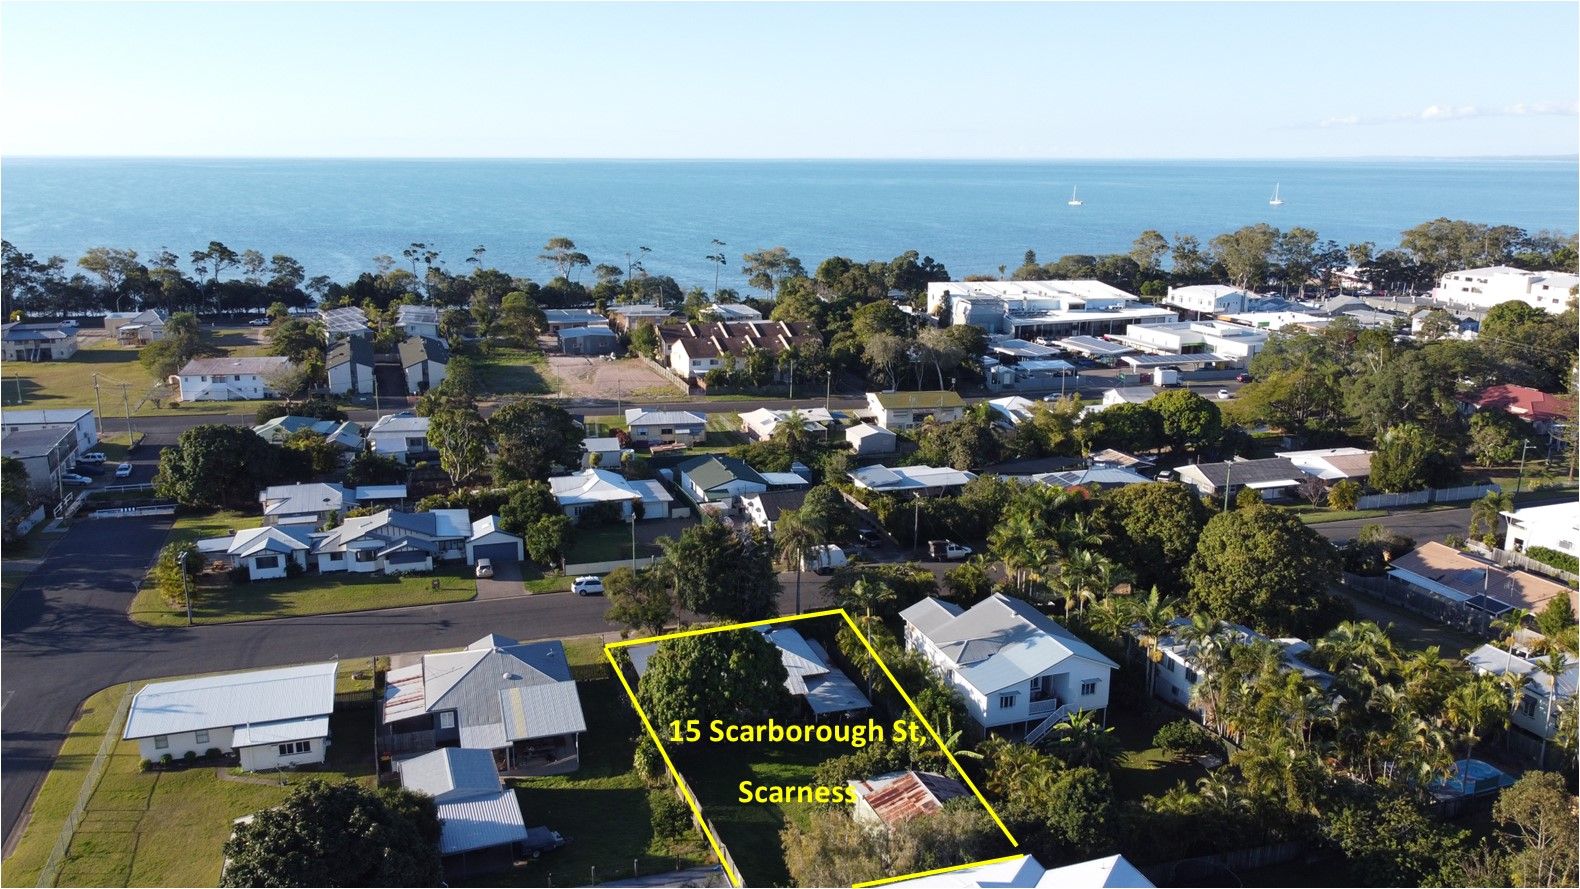 15 Scarborough St, Scarness QLD 4655, Image 0